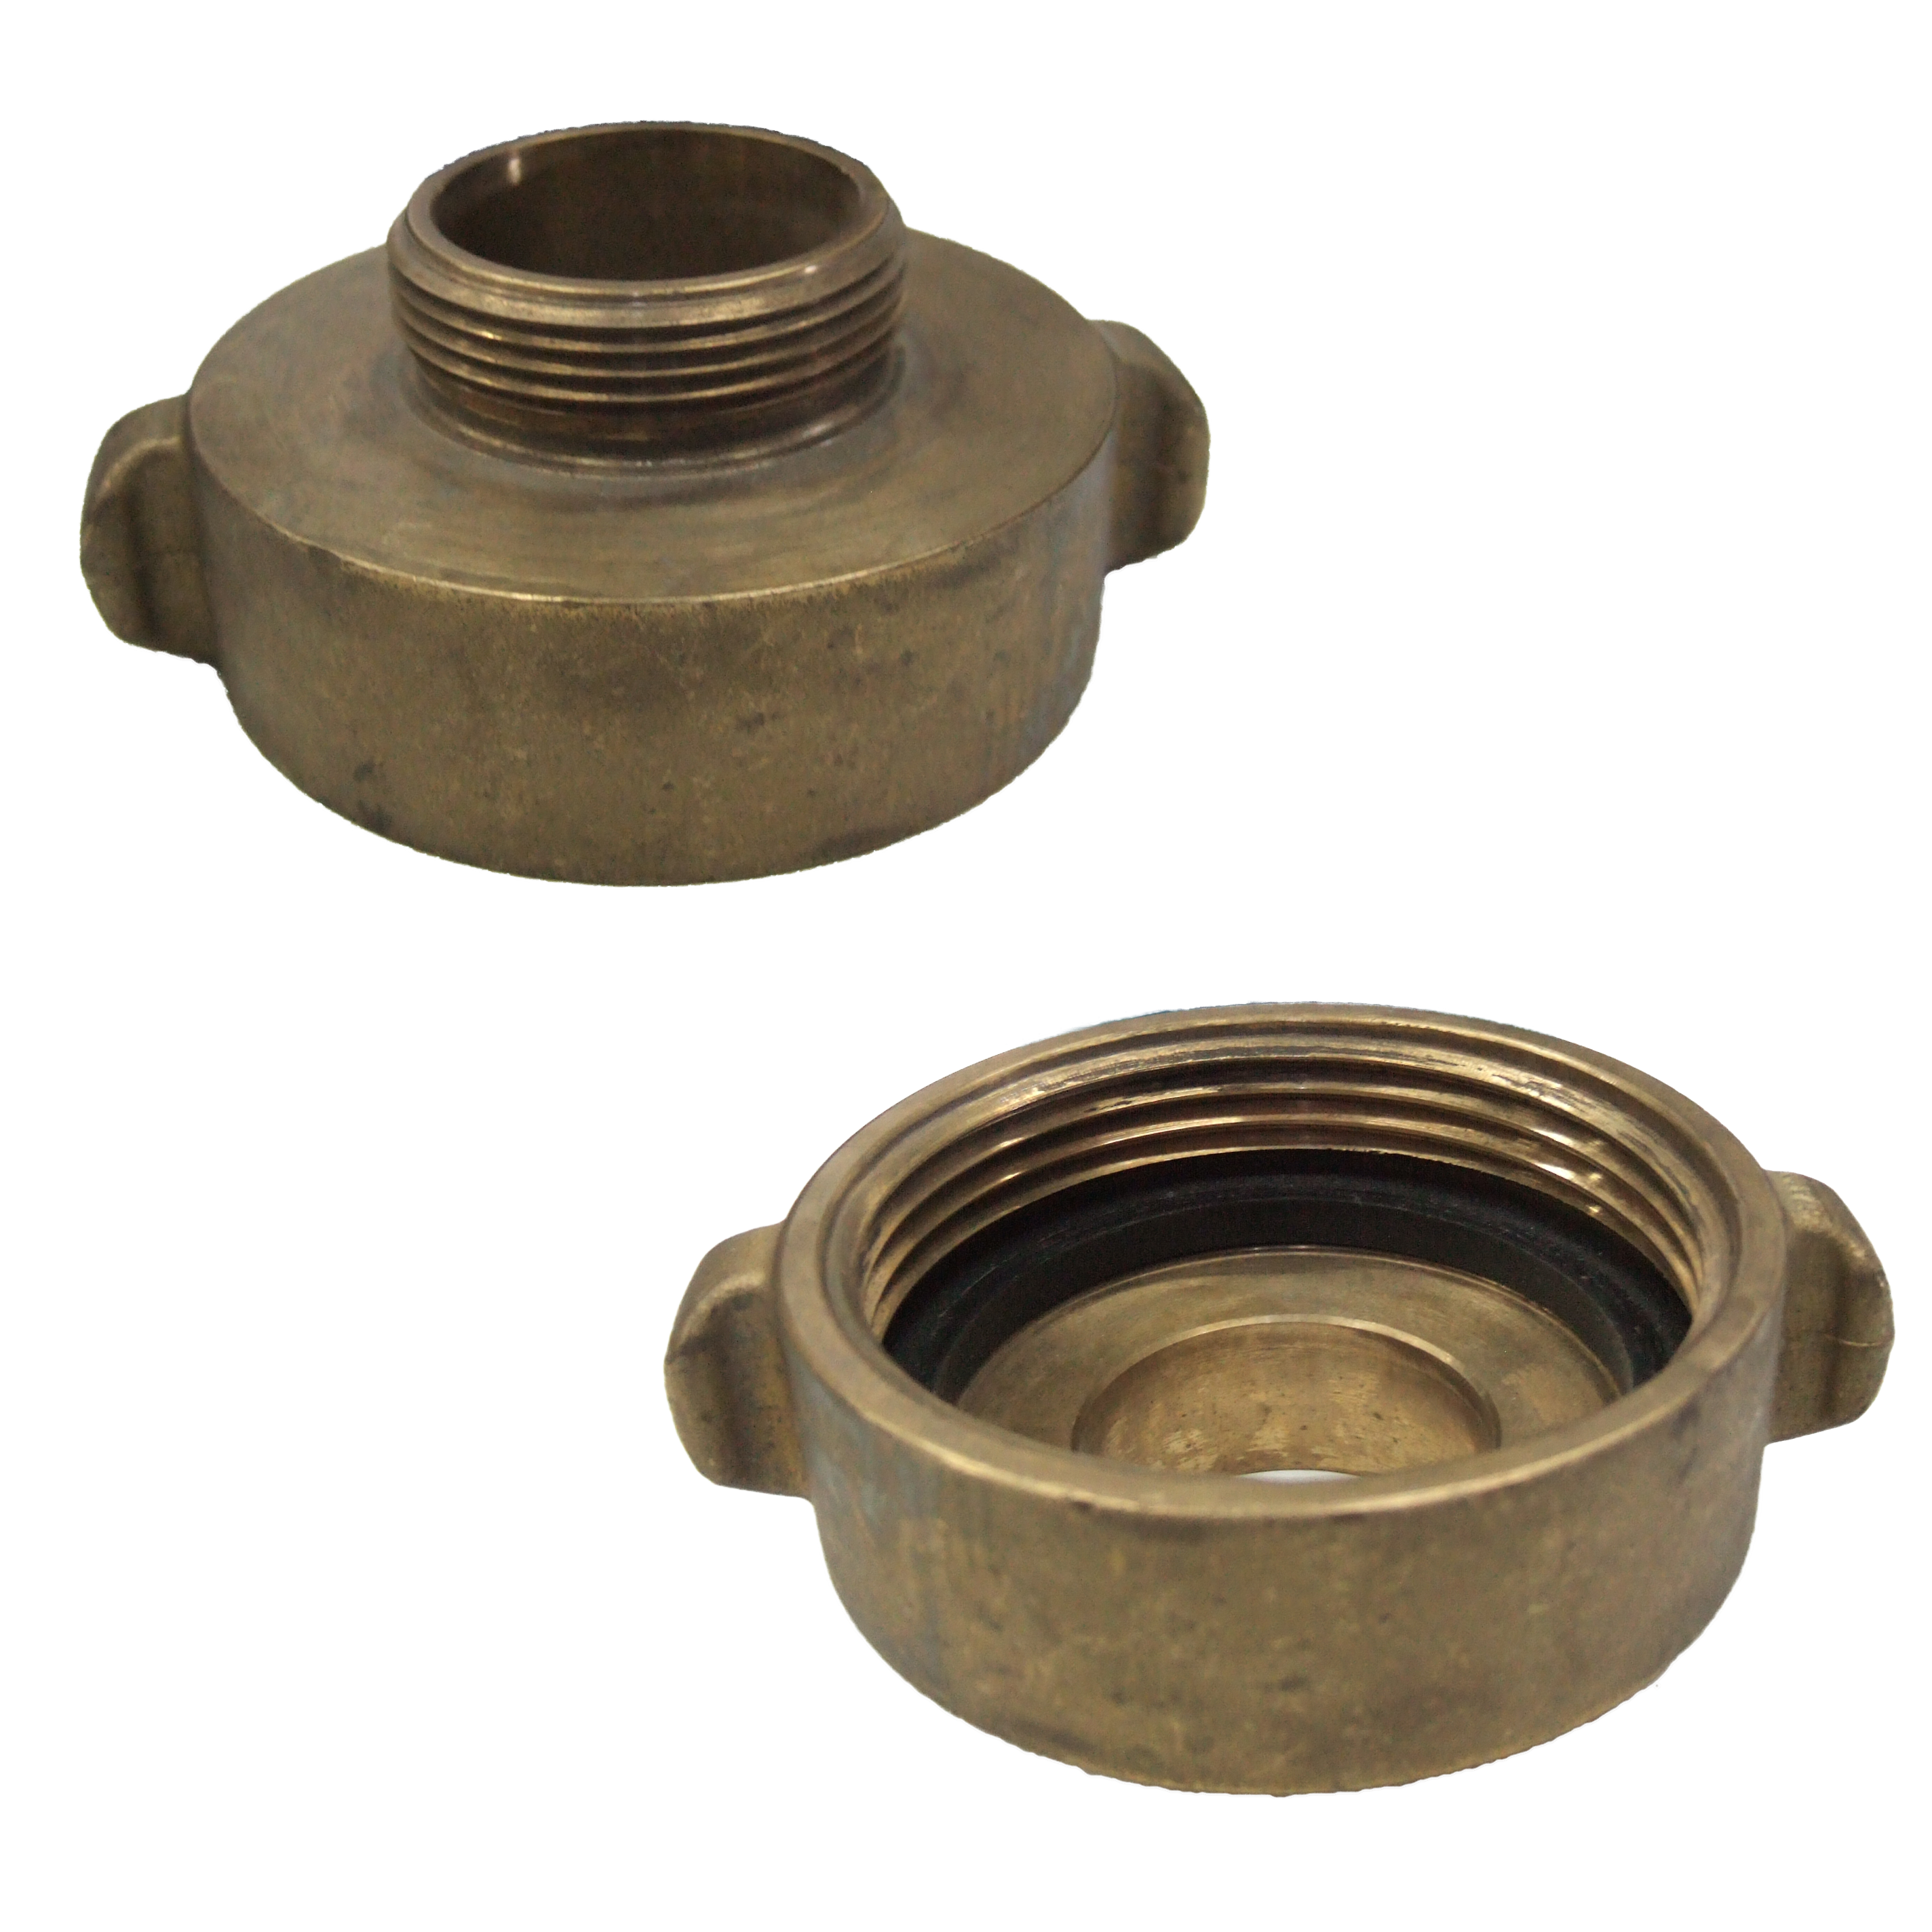 Threaded brass reducer 2.5 inch to 1.5 inch female to male Quebec